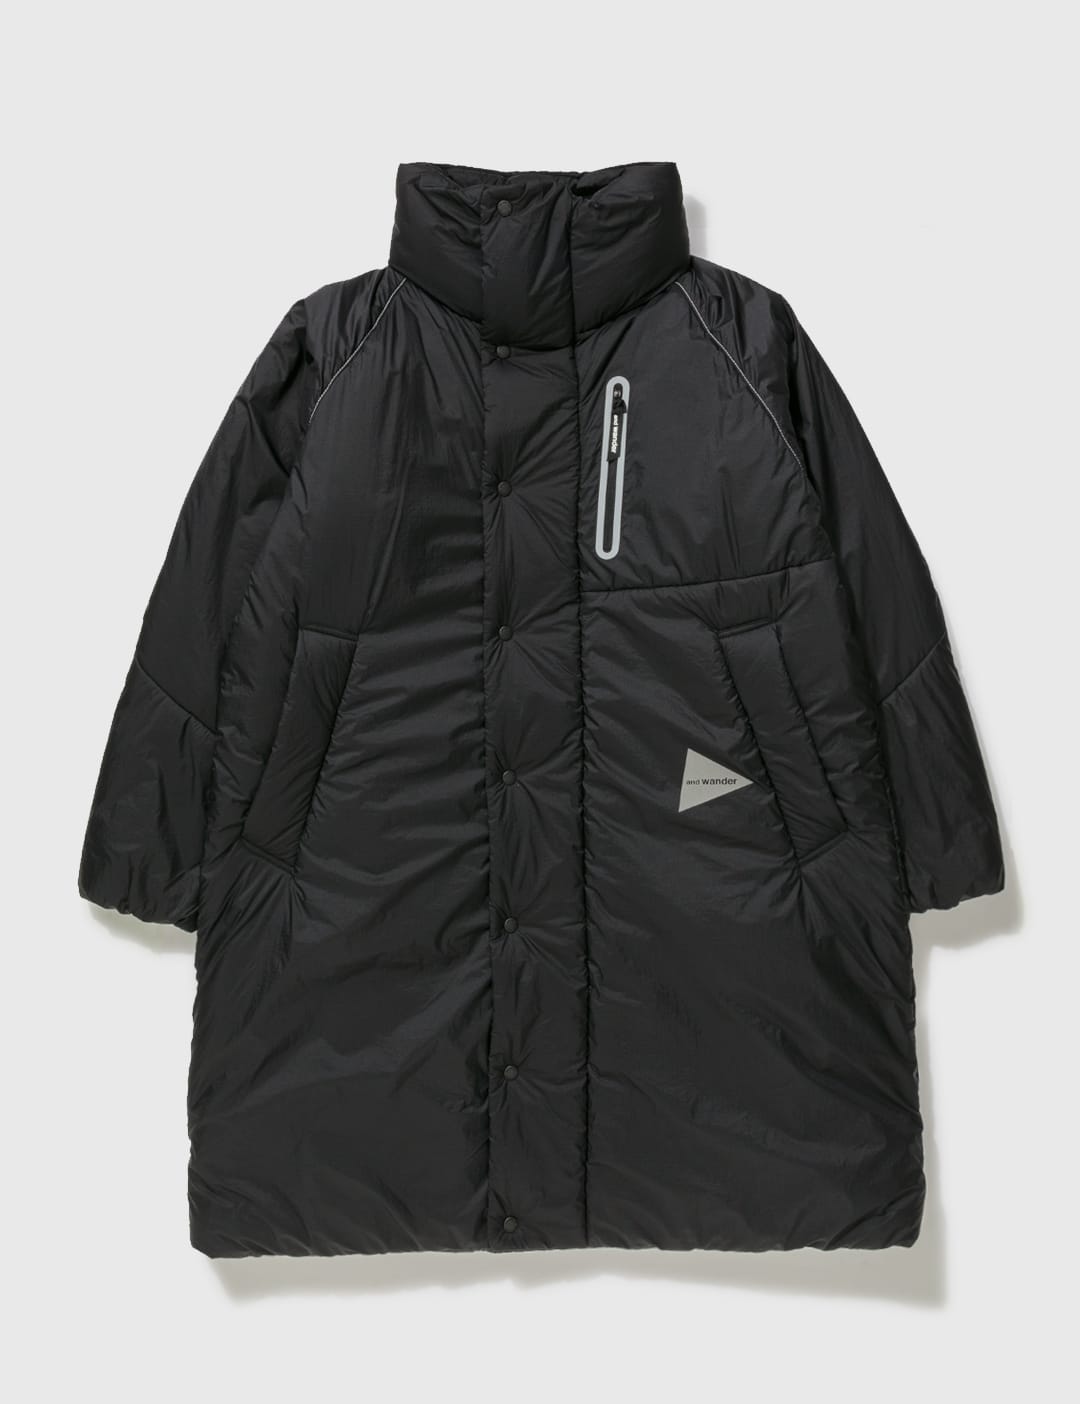 and wander - PrimaLoft Rip Coat | HBX - Globally Curated Fashion